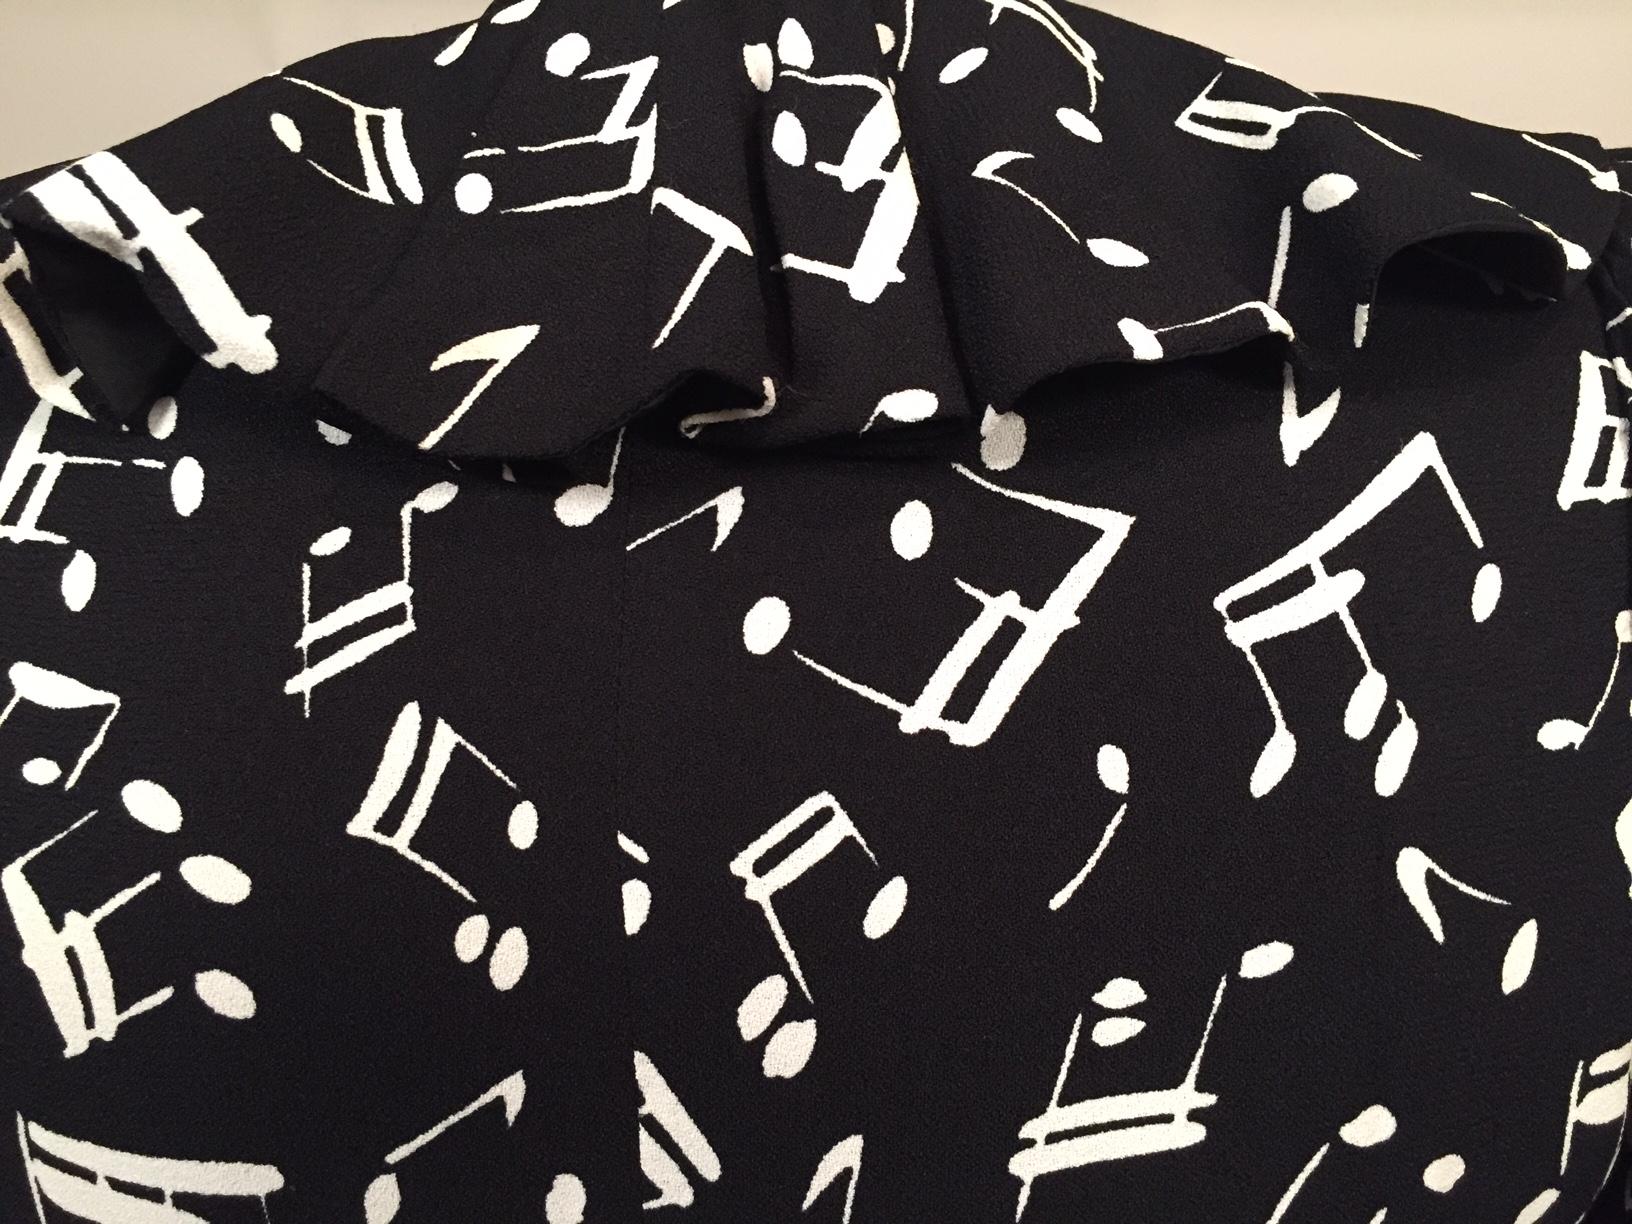 Yves Saint Laurent Two Piece Dress Music Notes Black and White Print 3